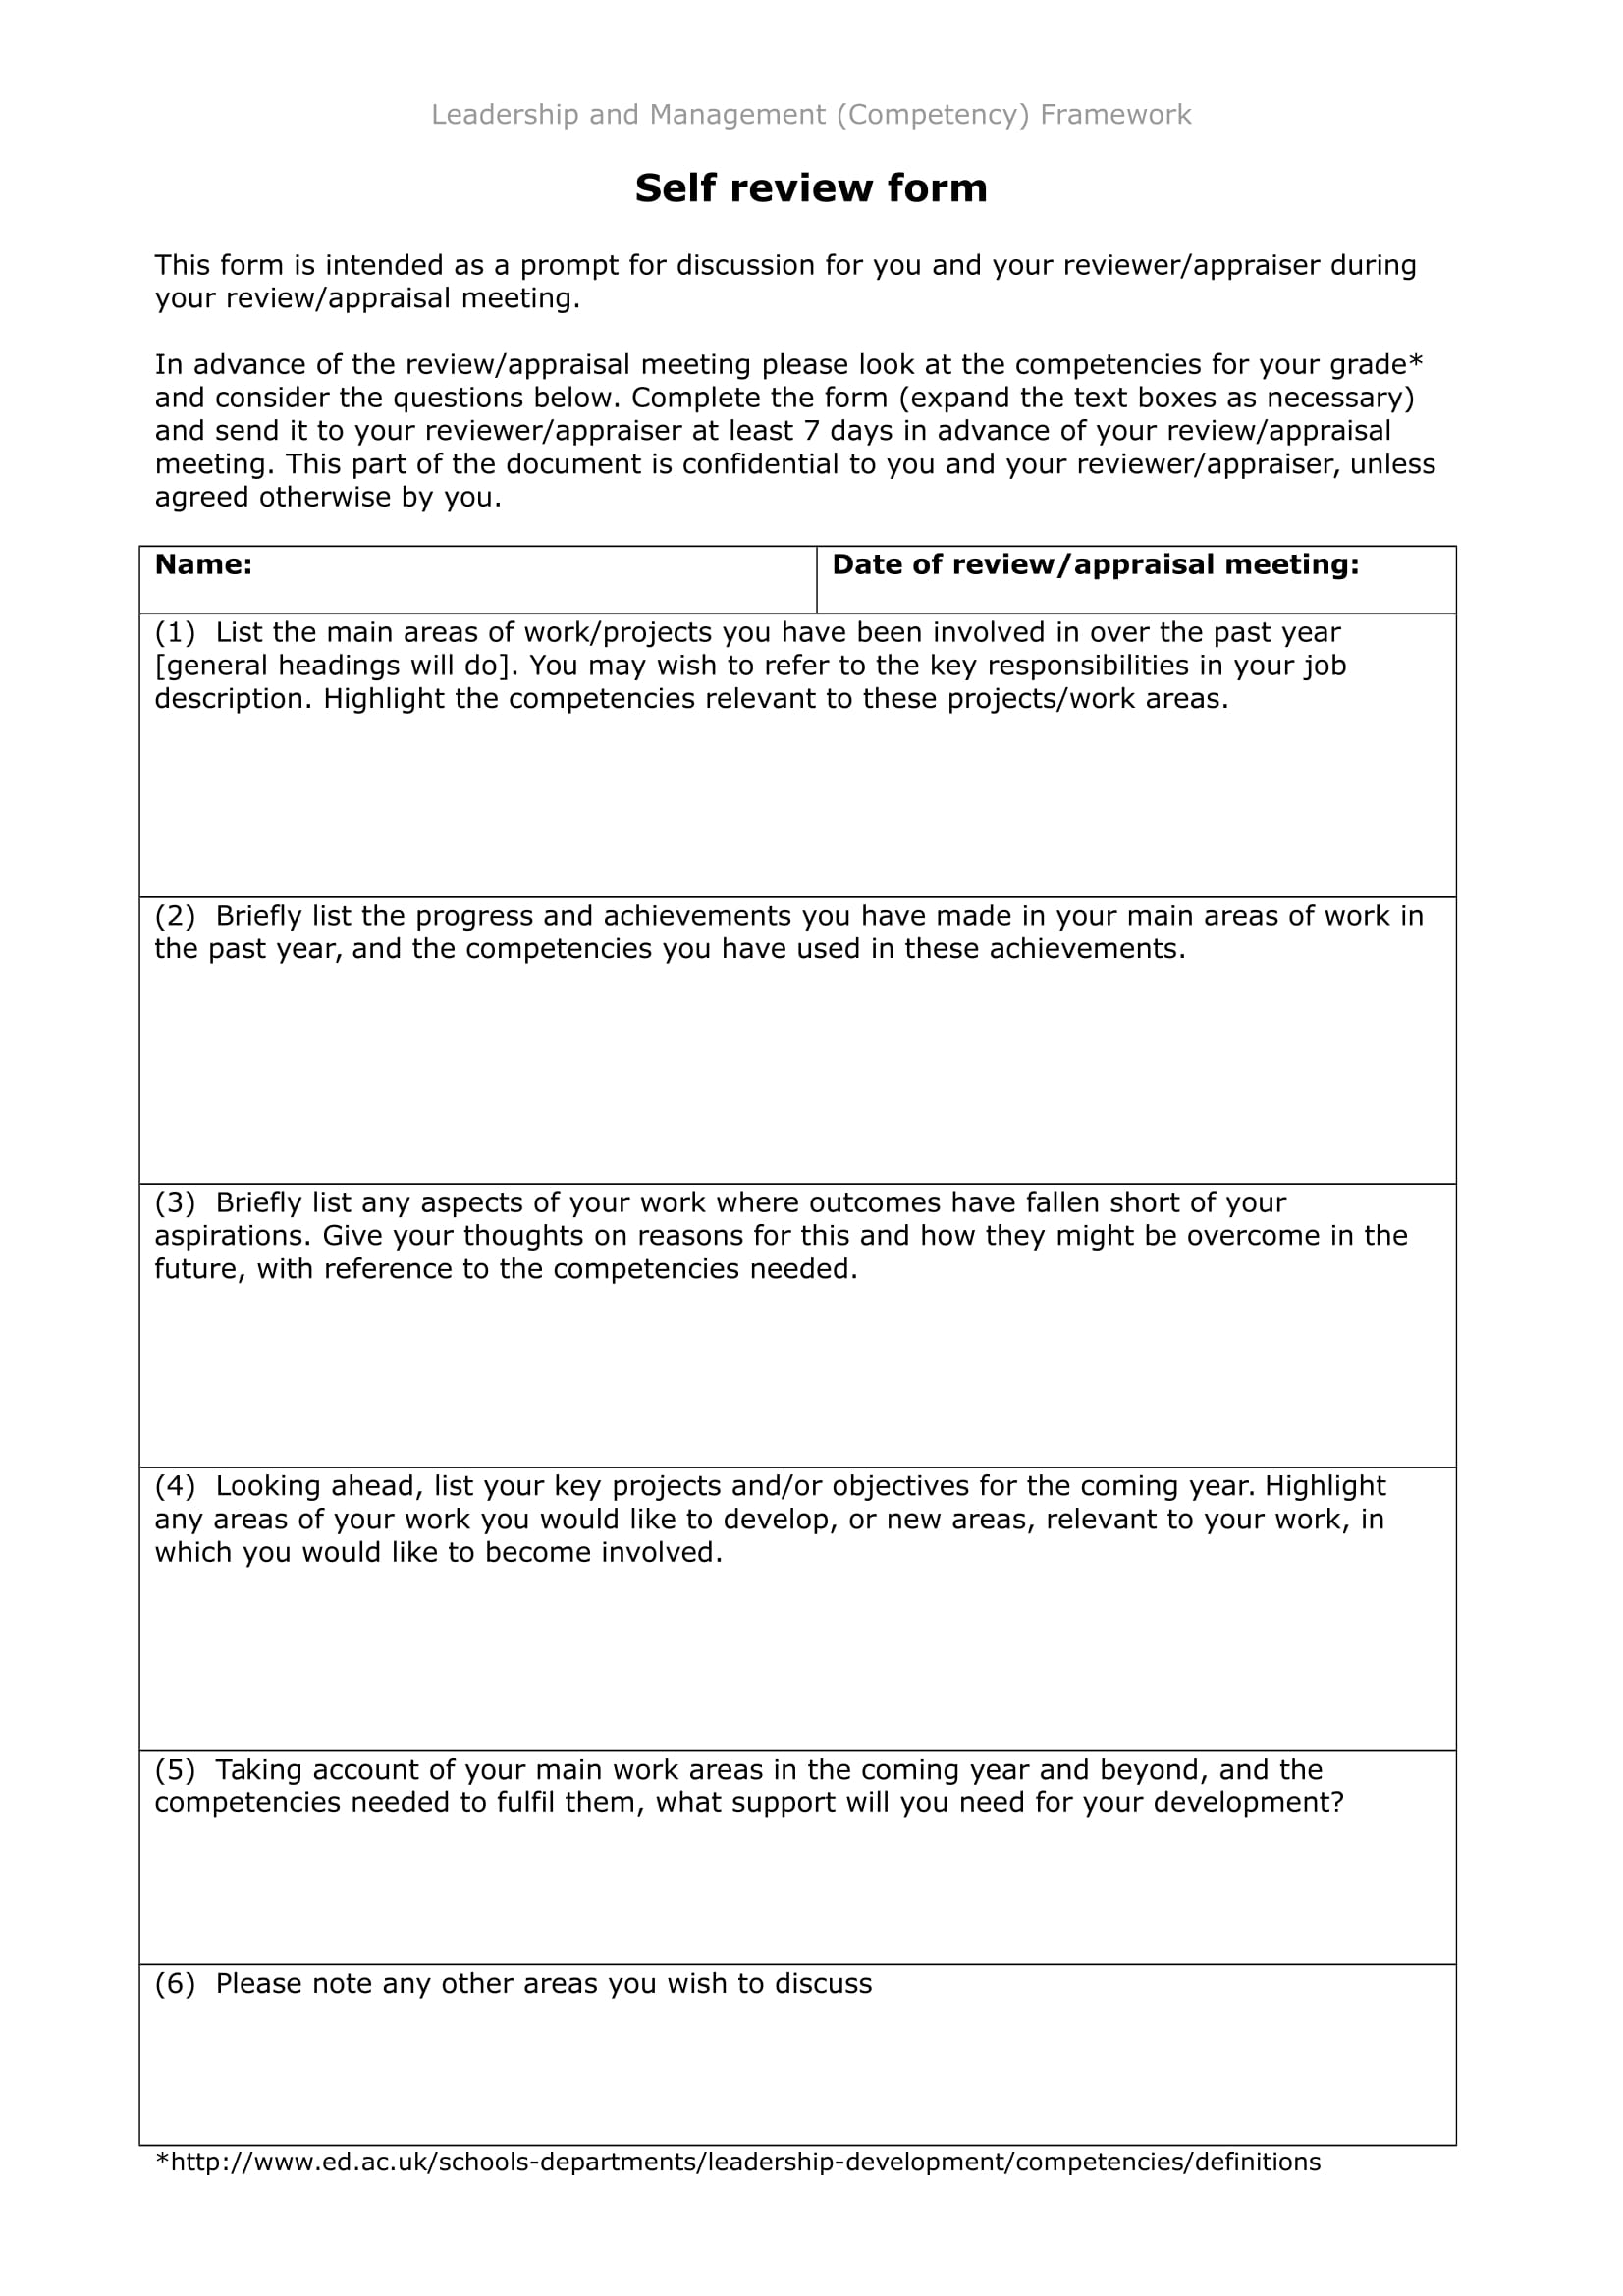 appraisal or self review form 11